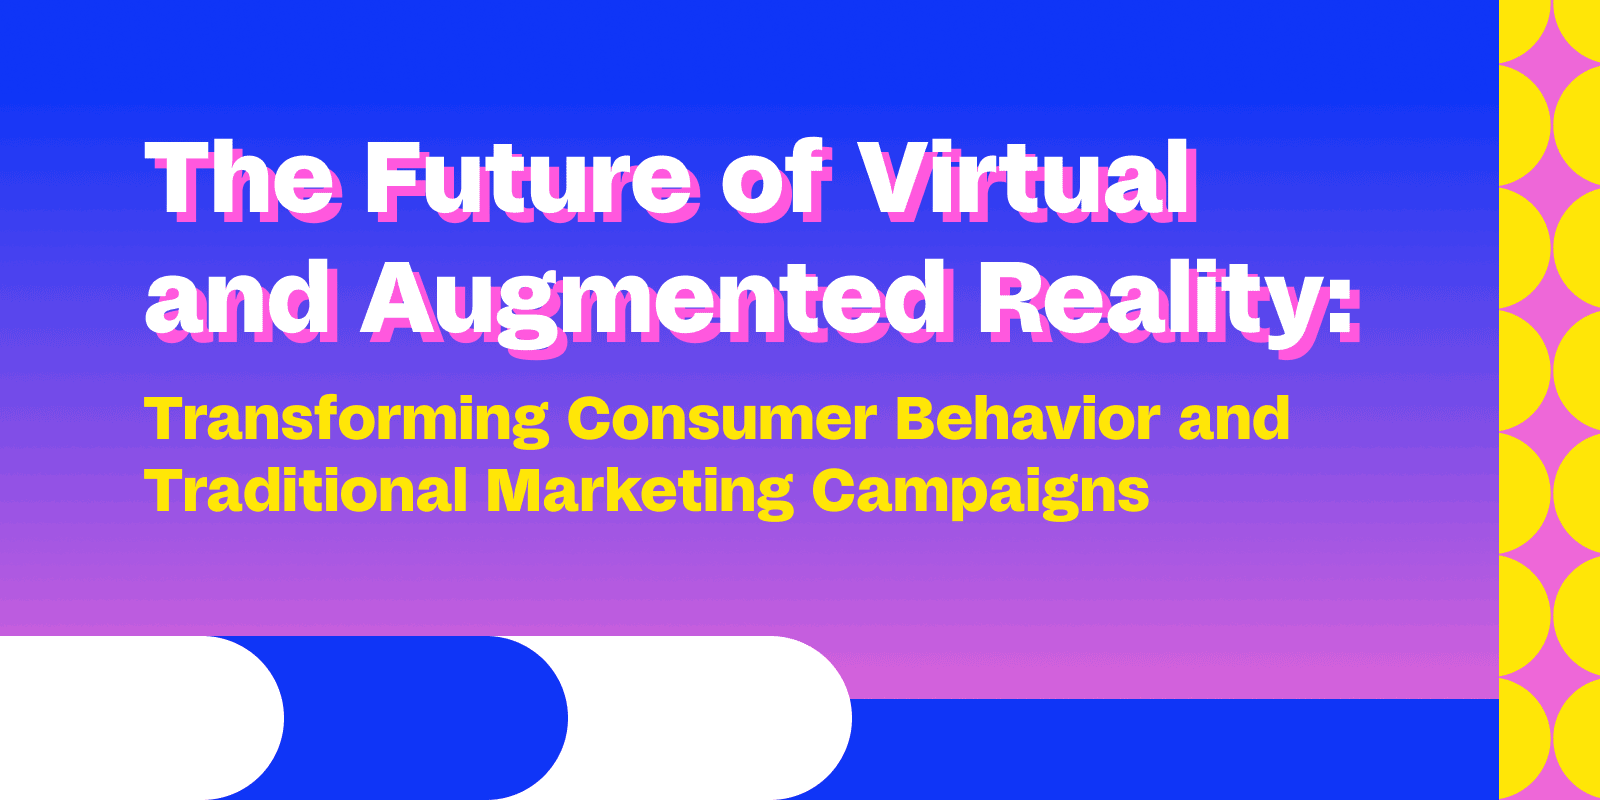 Global Augmented & Virtual Reality in Cosmetic & Beauty Market